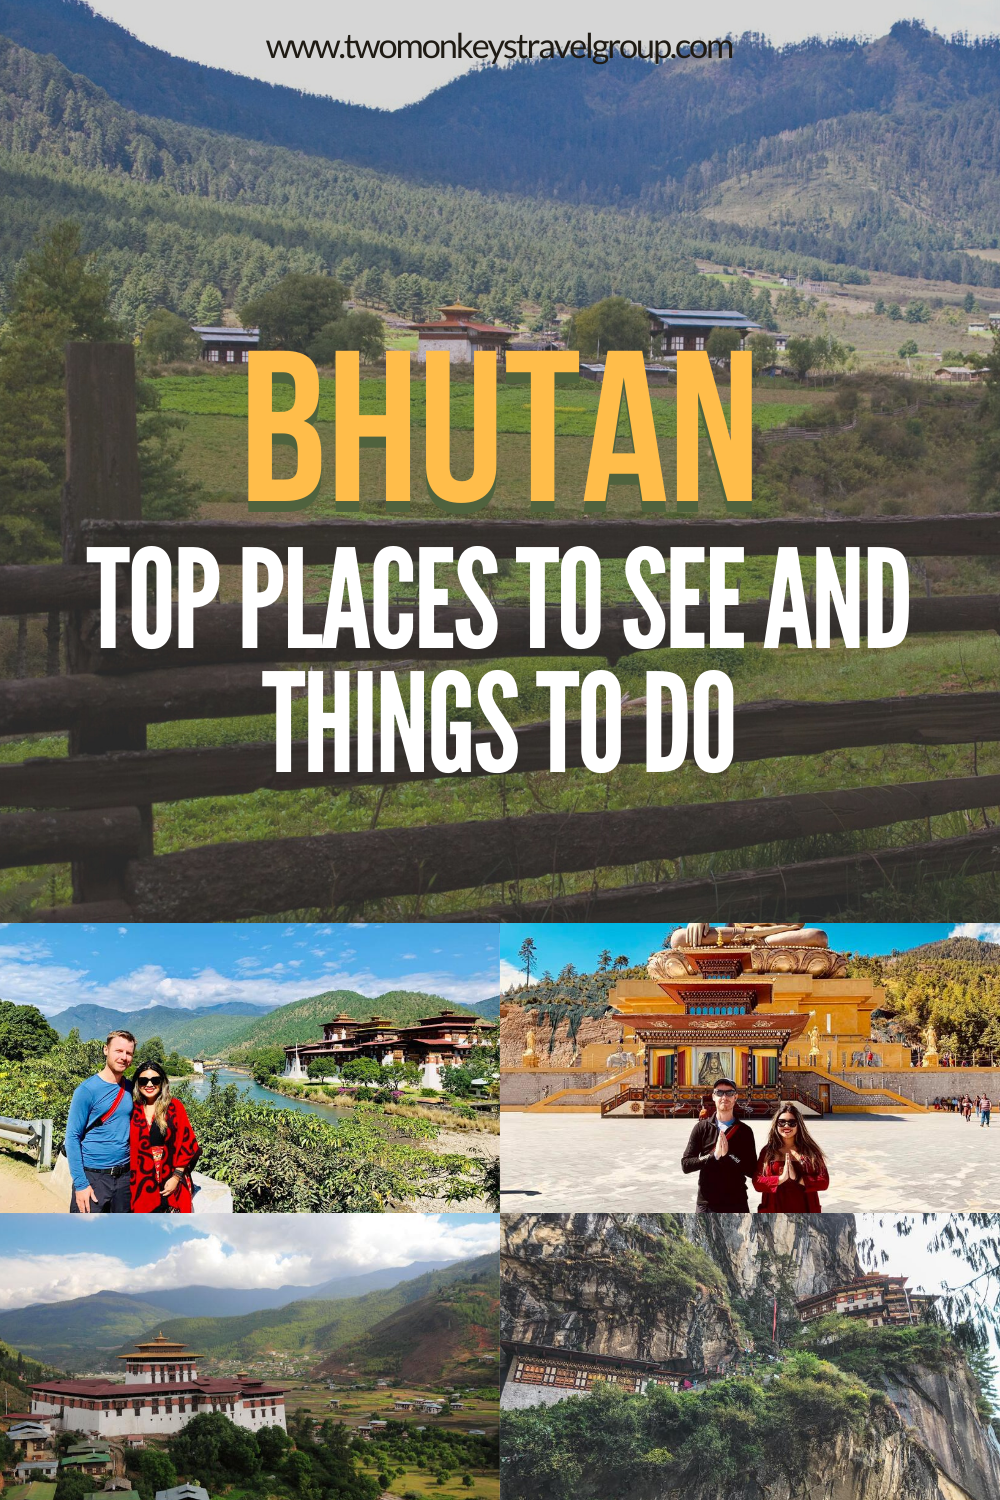 10 Top Places to See and Things to Do in Bhutan